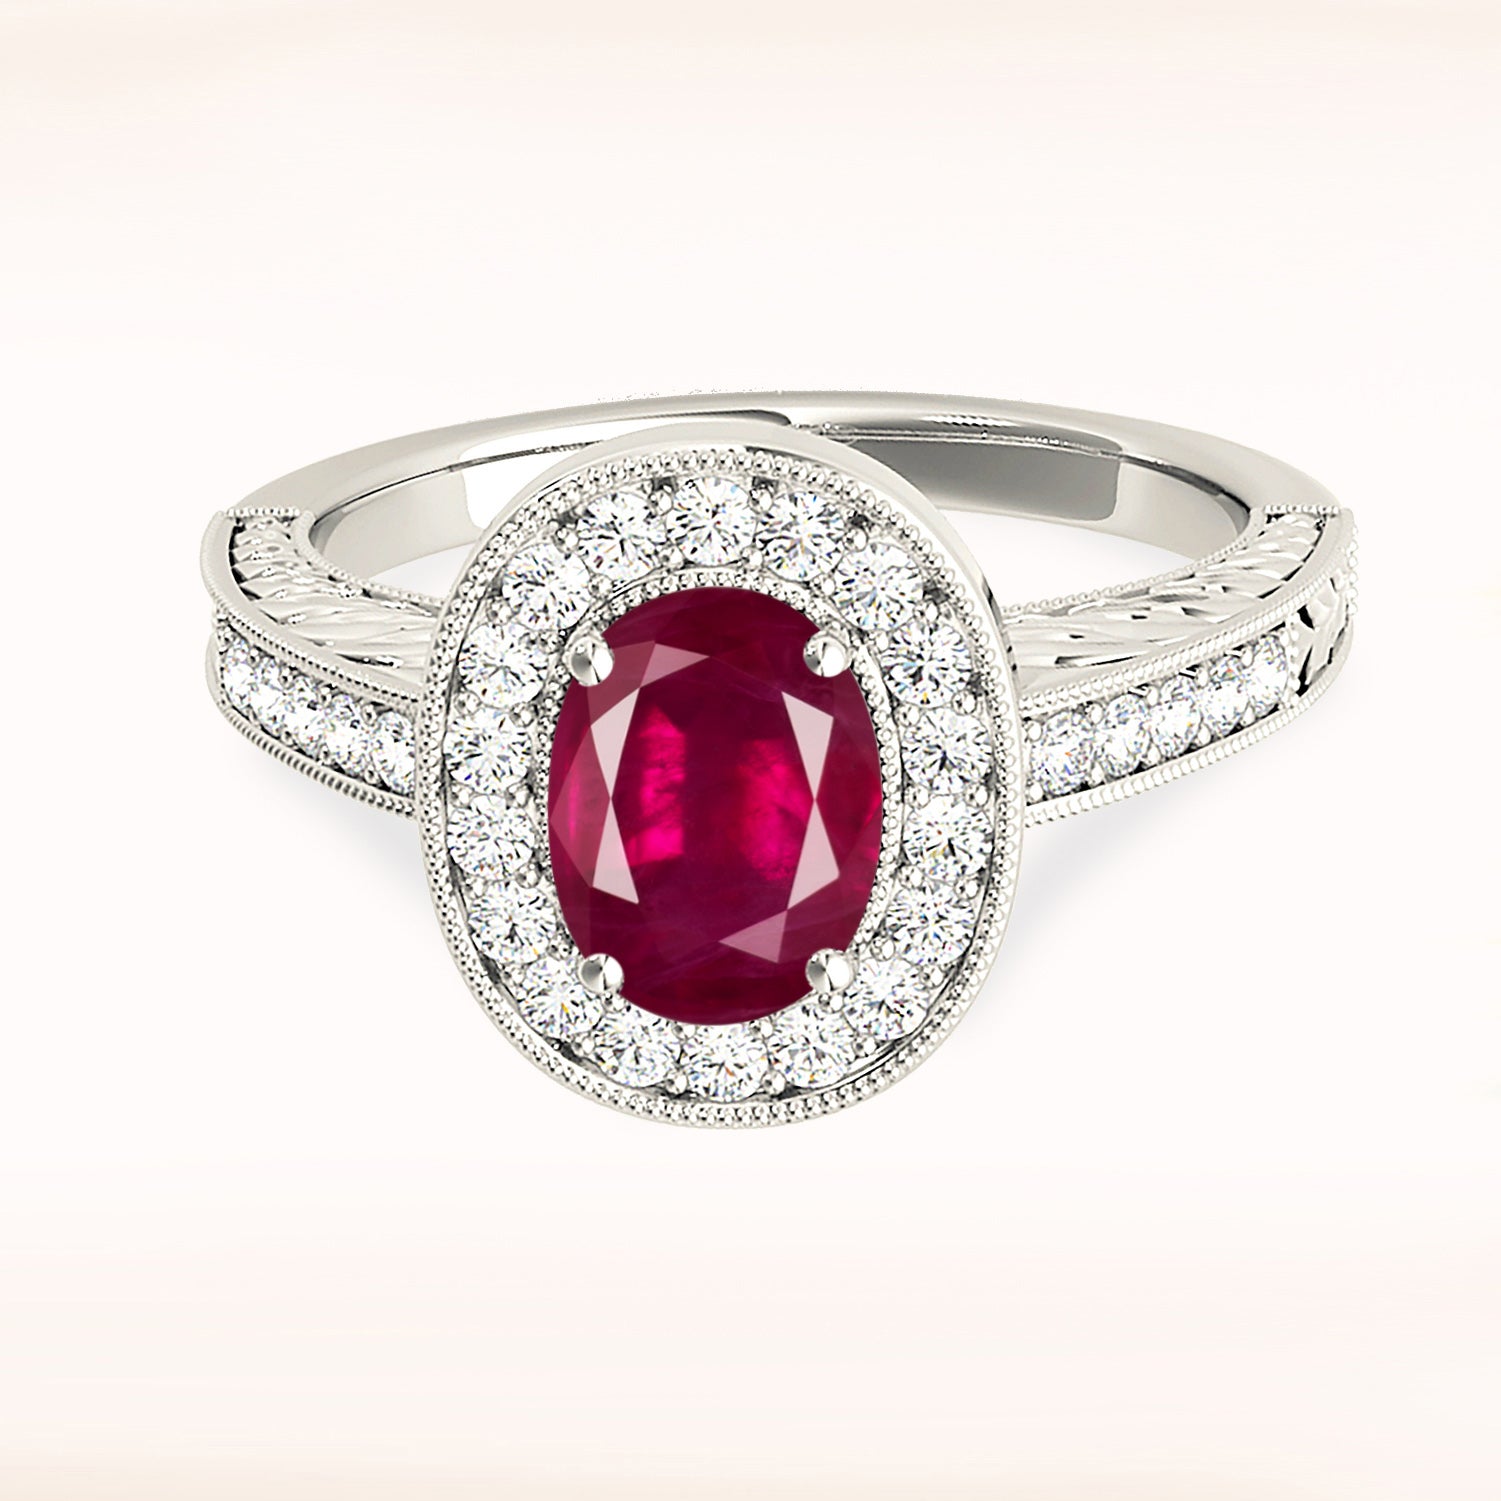 2.07 ct. Genuine Oval Ruby Ring with 0.35 ctw. Diamond Halo And Filigree Diamond Band-in 14K/18K White, Yellow, Rose Gold and Platinum - Christmas Jewelry Gift -VIRABYANI